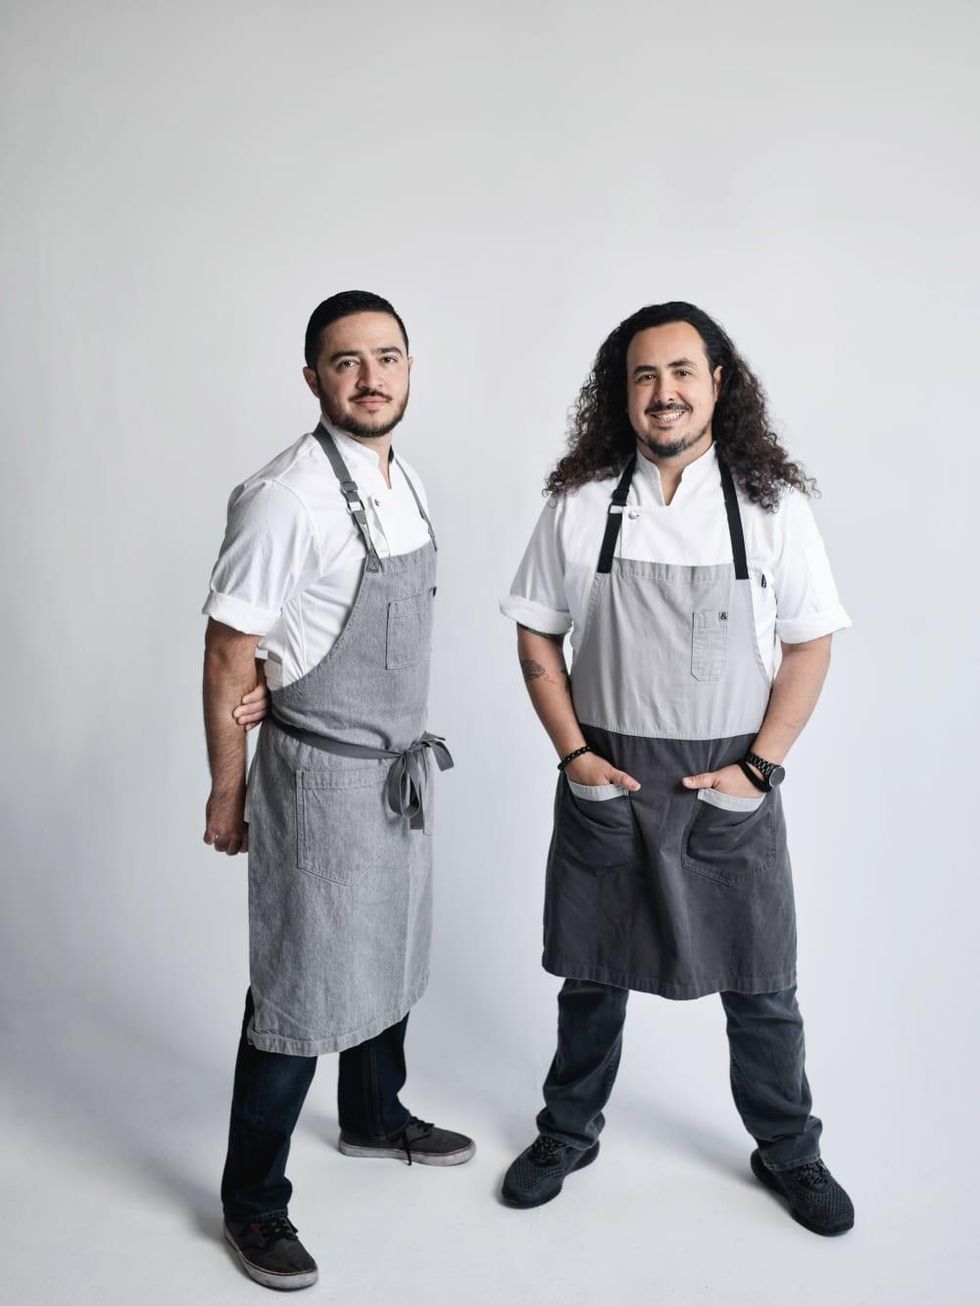 Diego Galicia and Rico Torres from Mixtli